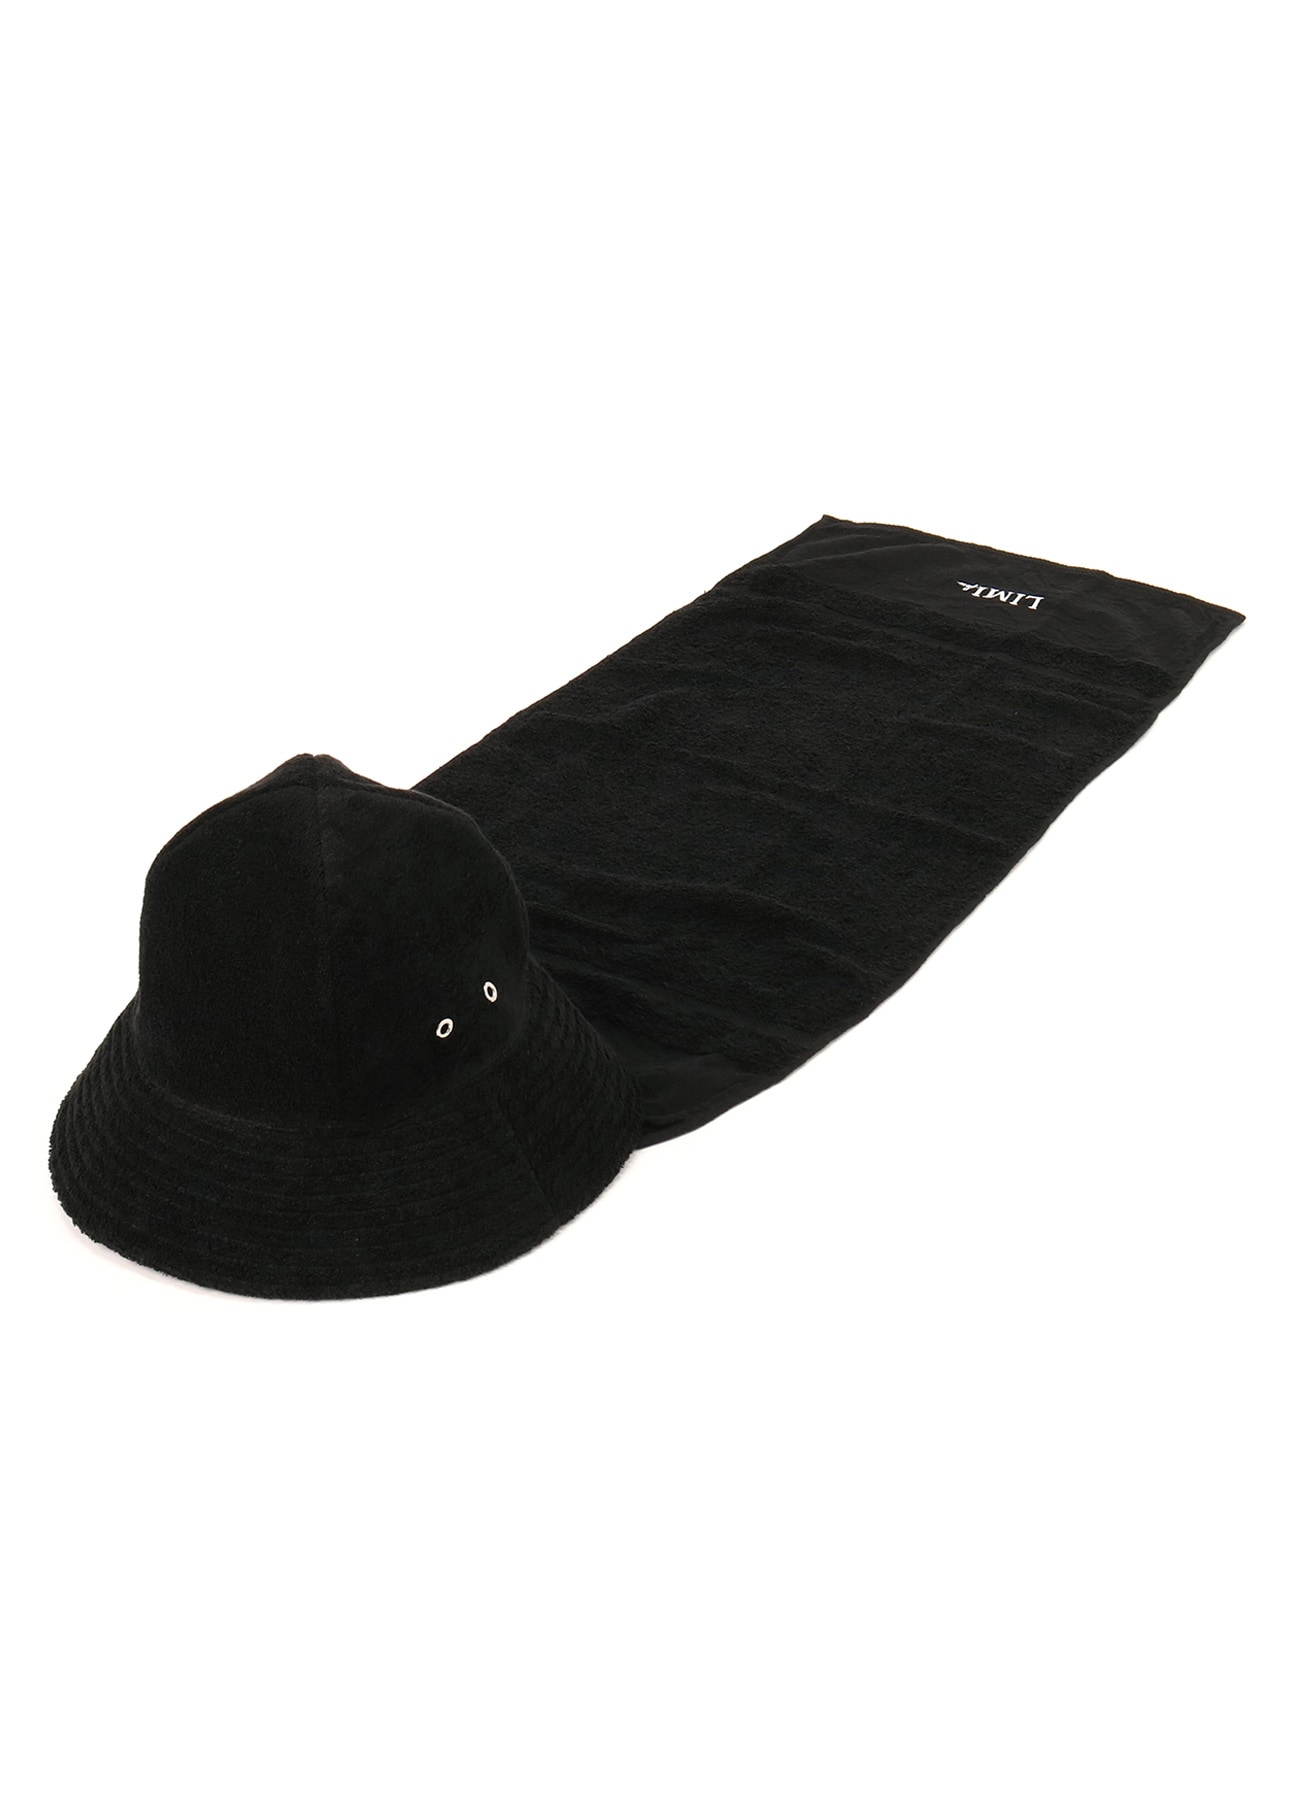 BLENDED LINEN PILE FLAT HAT WITH ATTACHED LOGO TOWEL